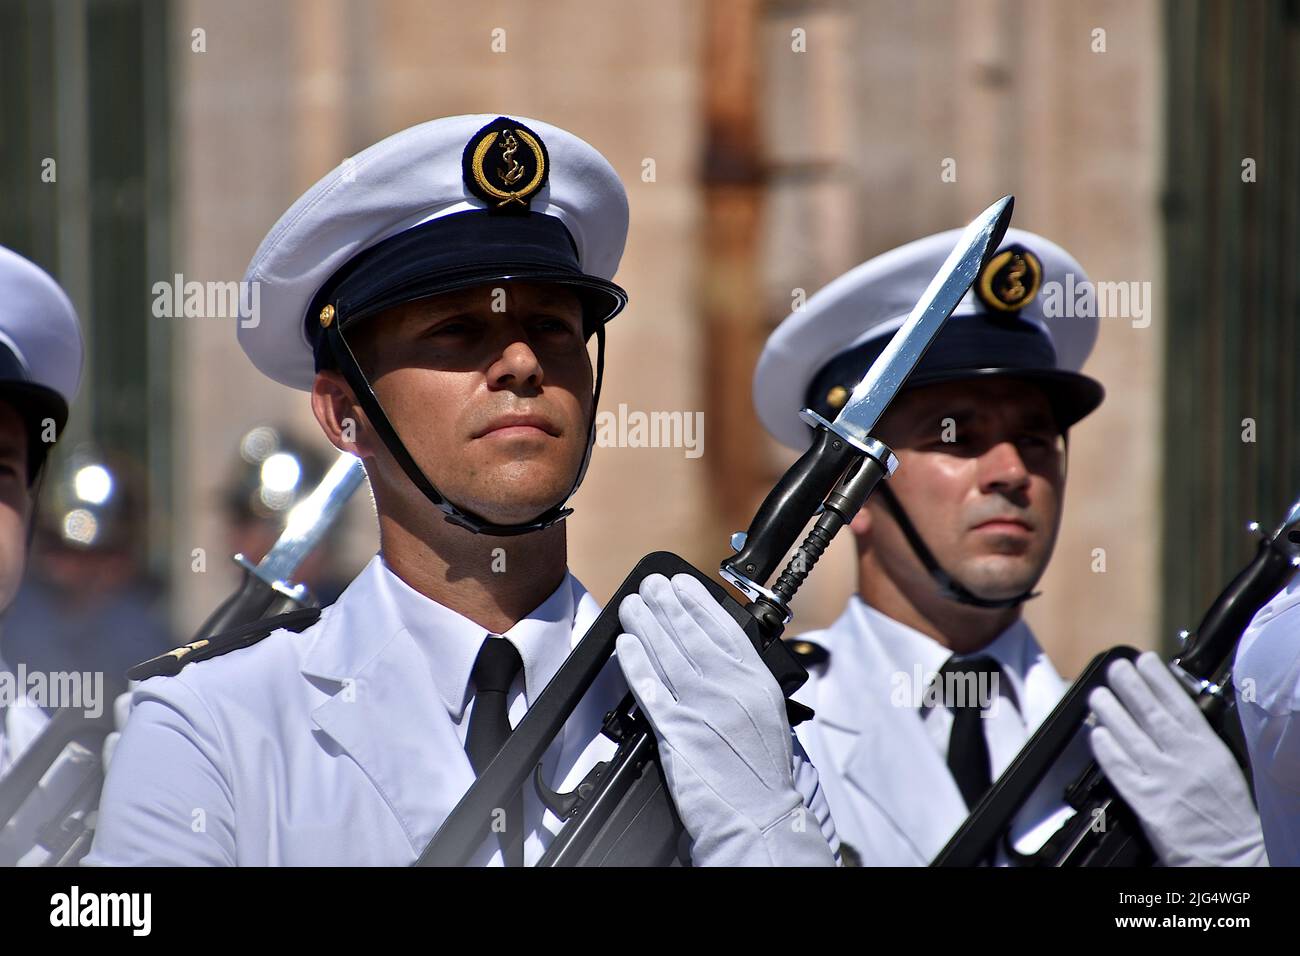 Officers of the Bataillon des Marins-Pompiers de Marseille (BMPM) in uniforms are seen during the ceremony. The helmet handover ceremony presided over by Mayor Benoît Payan took place at Place Bargemon in front of Marseille Town Hall. 31 students from the school of firefighters of the Navy formalised their operational integration into the Fire and Rescue Center (CIS) and the start of their career as quartermasters of the fleet. (Photo by Gerard Bottino / SOPA Images/Sipa USA) Stock Photo